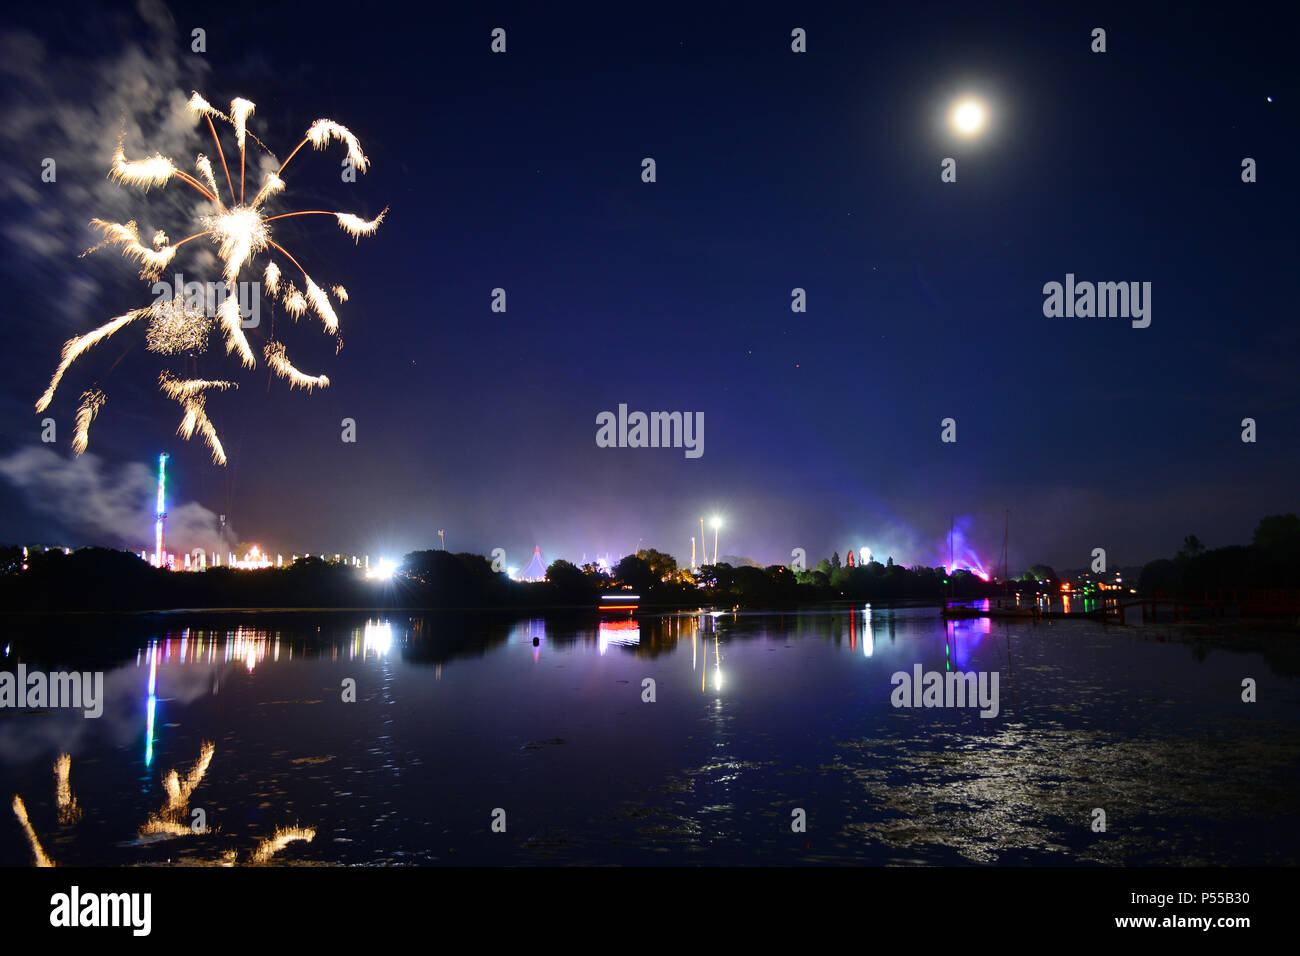 Newport, Isle of Wight, UK. 24th June, 2018. Fireworks and a near full moon herald the end of the last day of the Isle of Wight Festival as the Sunday night headliner band 'The Killers' play on the main stage, seen in the distance in bright lights. Photograph taken from the banks of the River Medina in Newport, Isle of Wight, June 24th 2018. Credit: Matthew Blythe/Alamy Live News Stock Photo